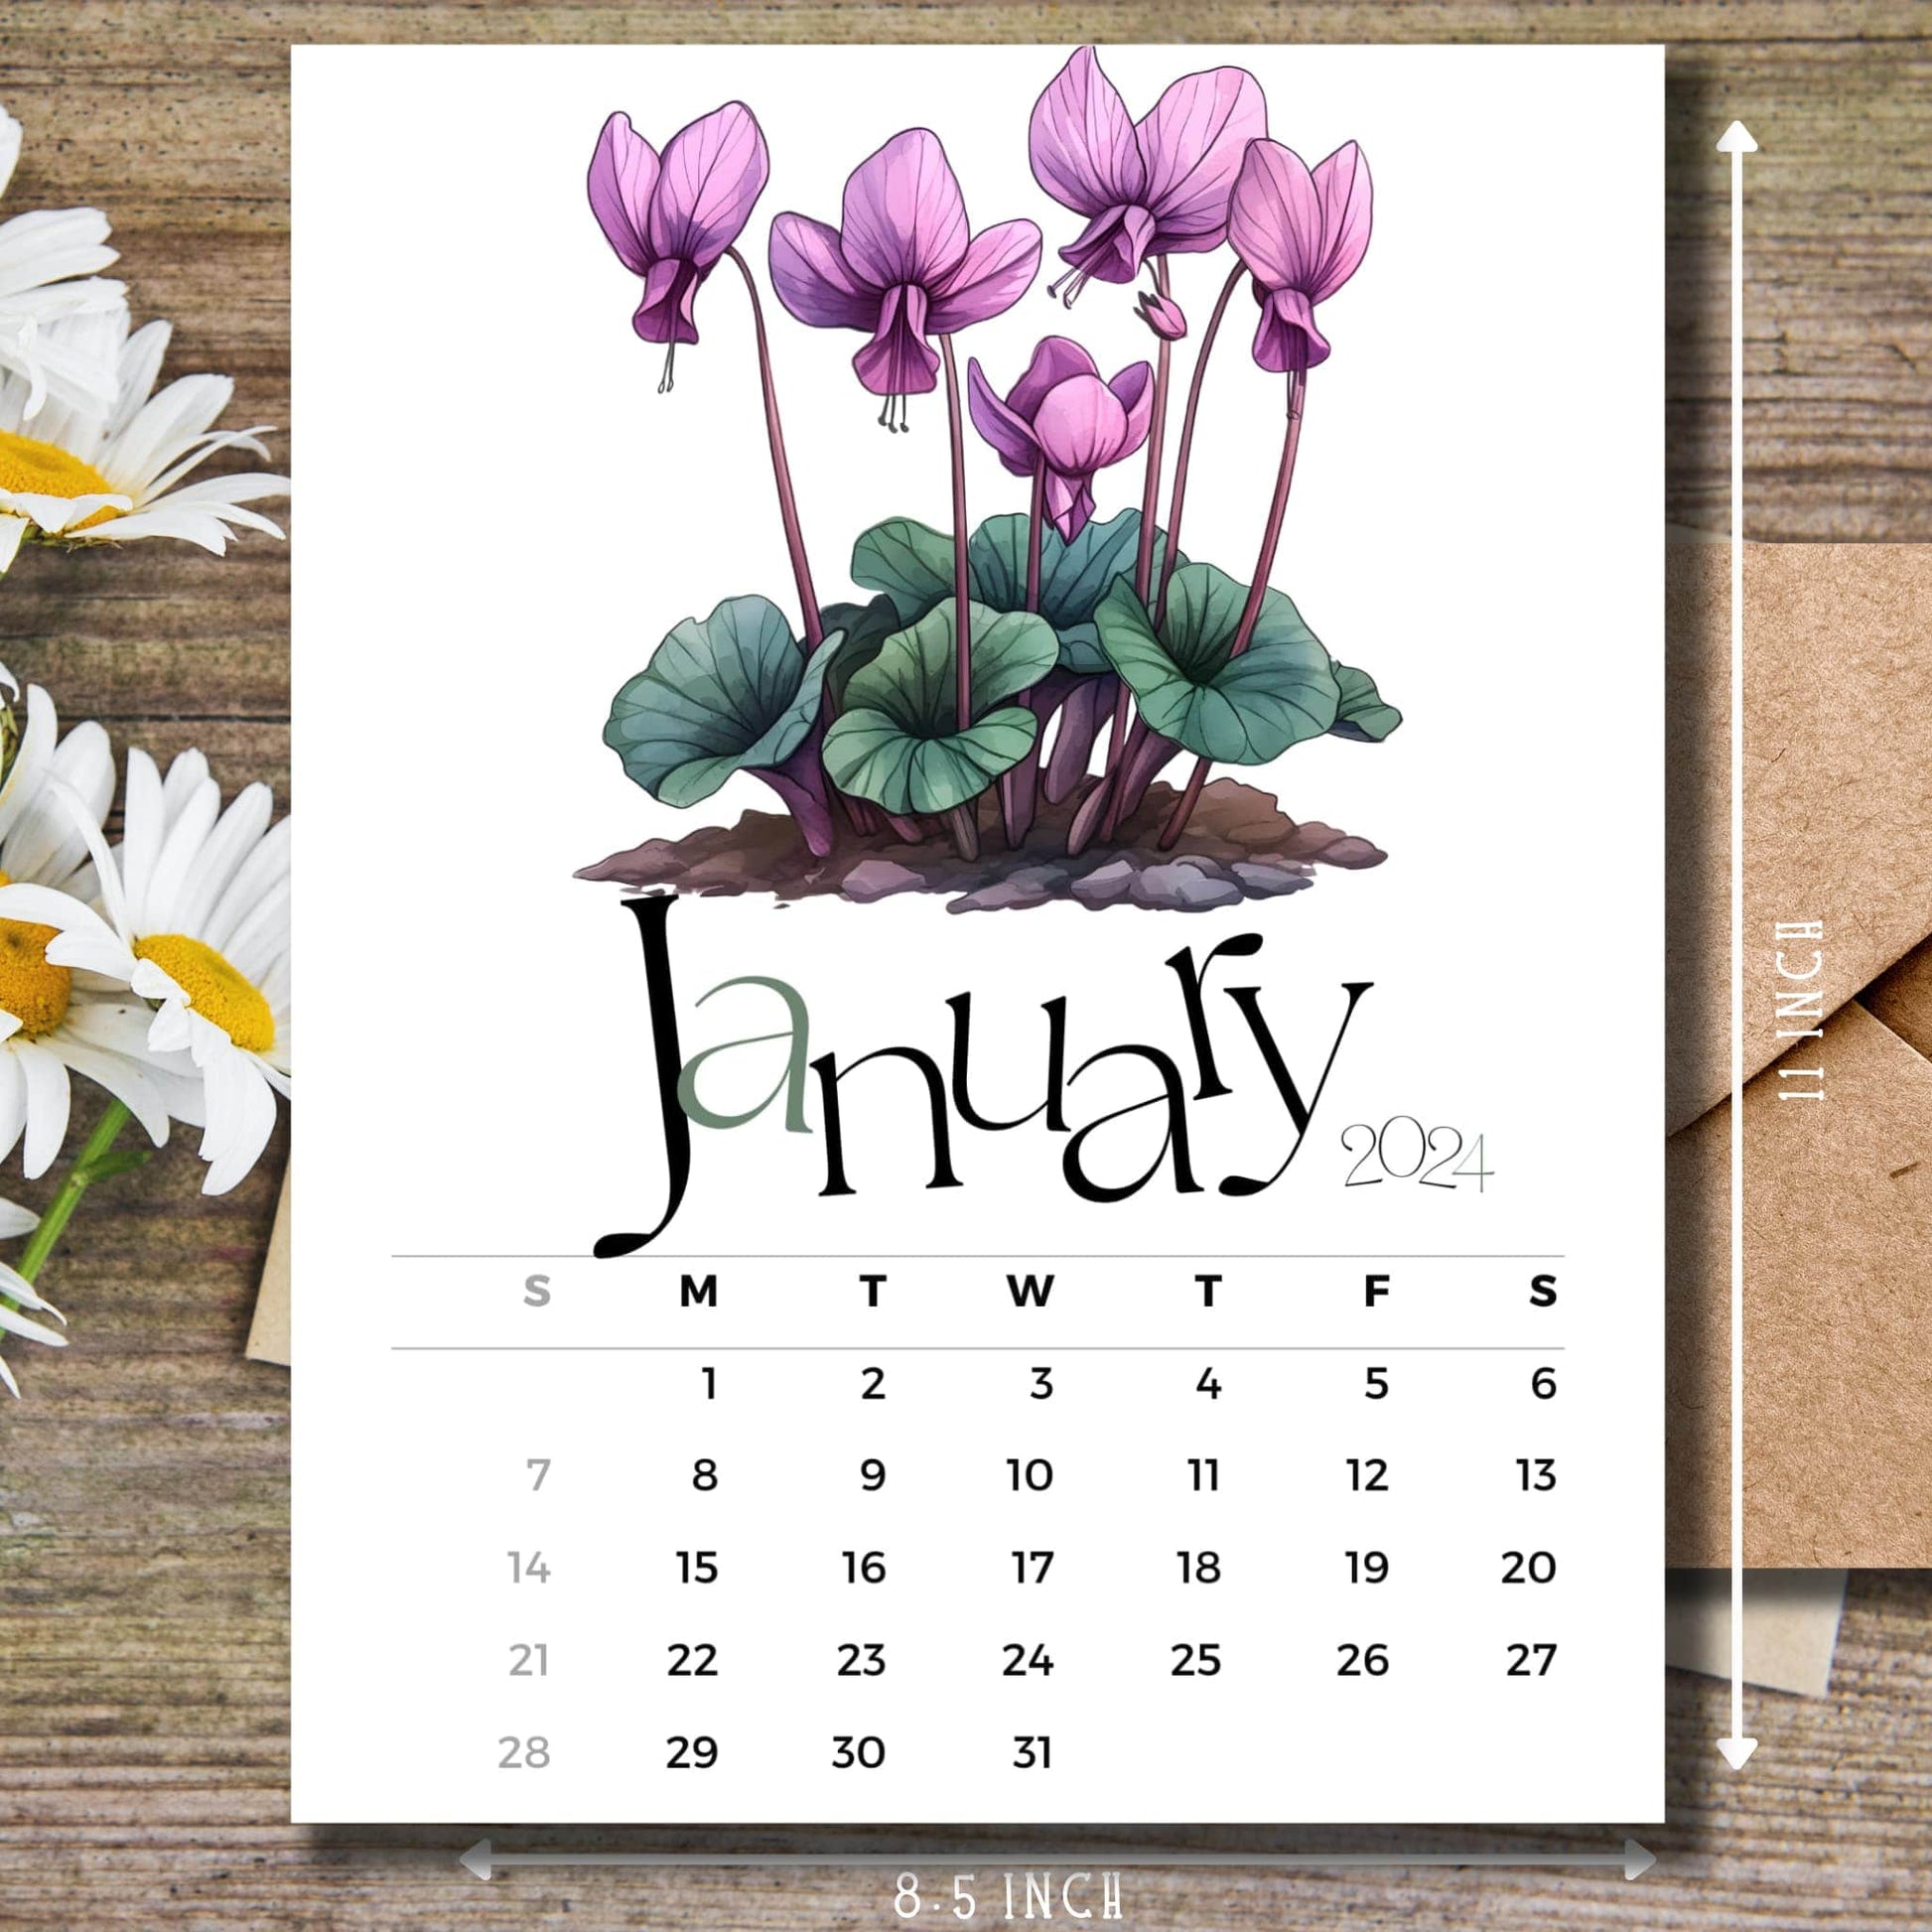 Cyclamen Charm January 2024 calendar on wooden desk with white flowers and size guide.